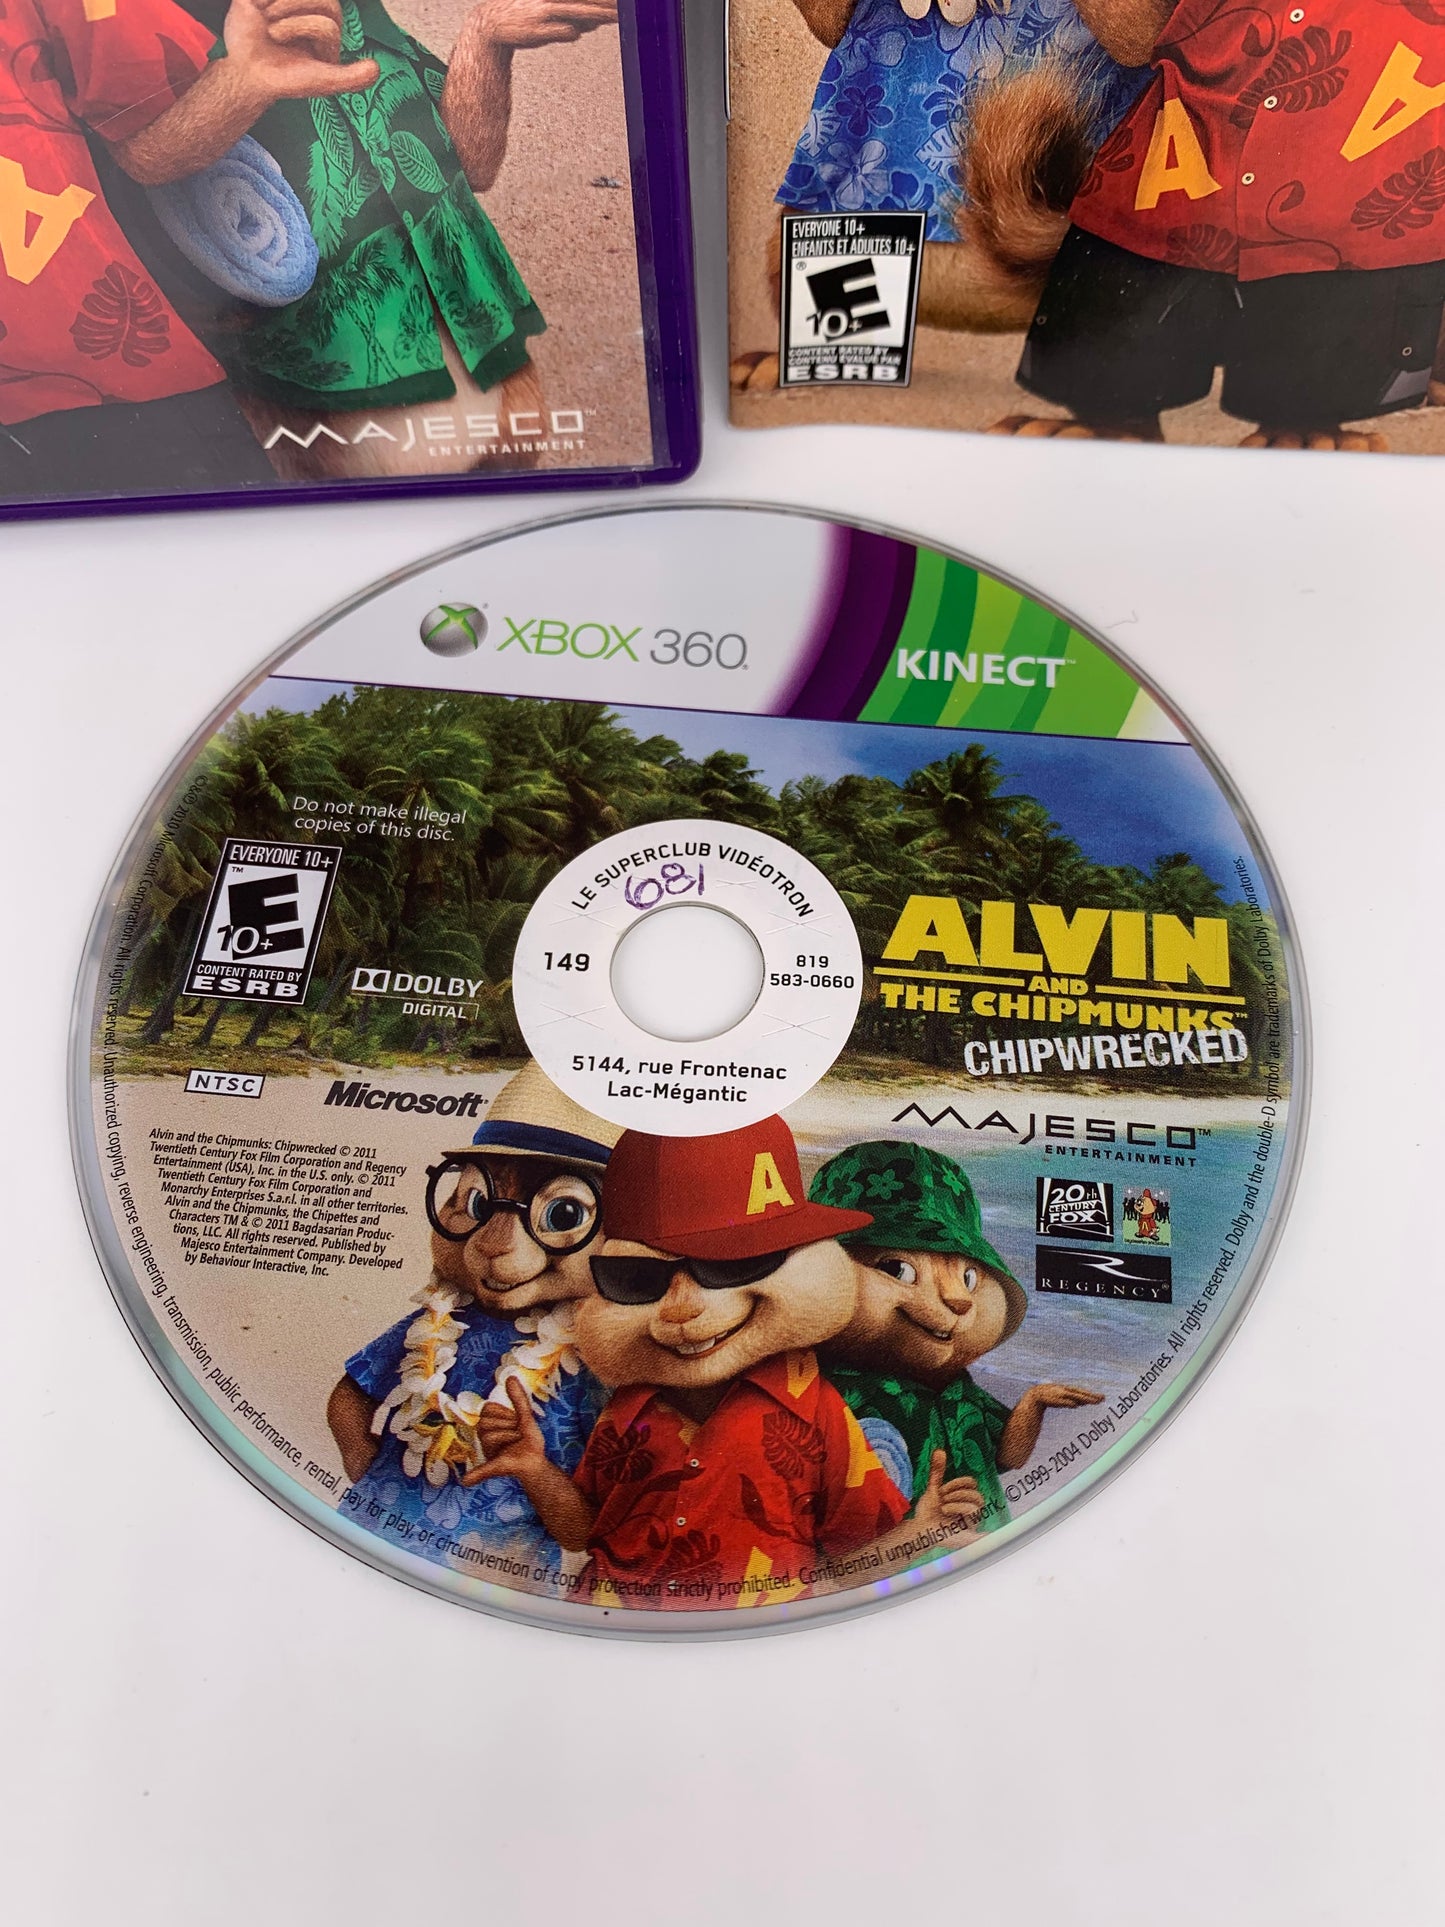 MiCROSOFT XBOX 360 | ALViN AND THE CHiPMUNKS CHiPWRECKED